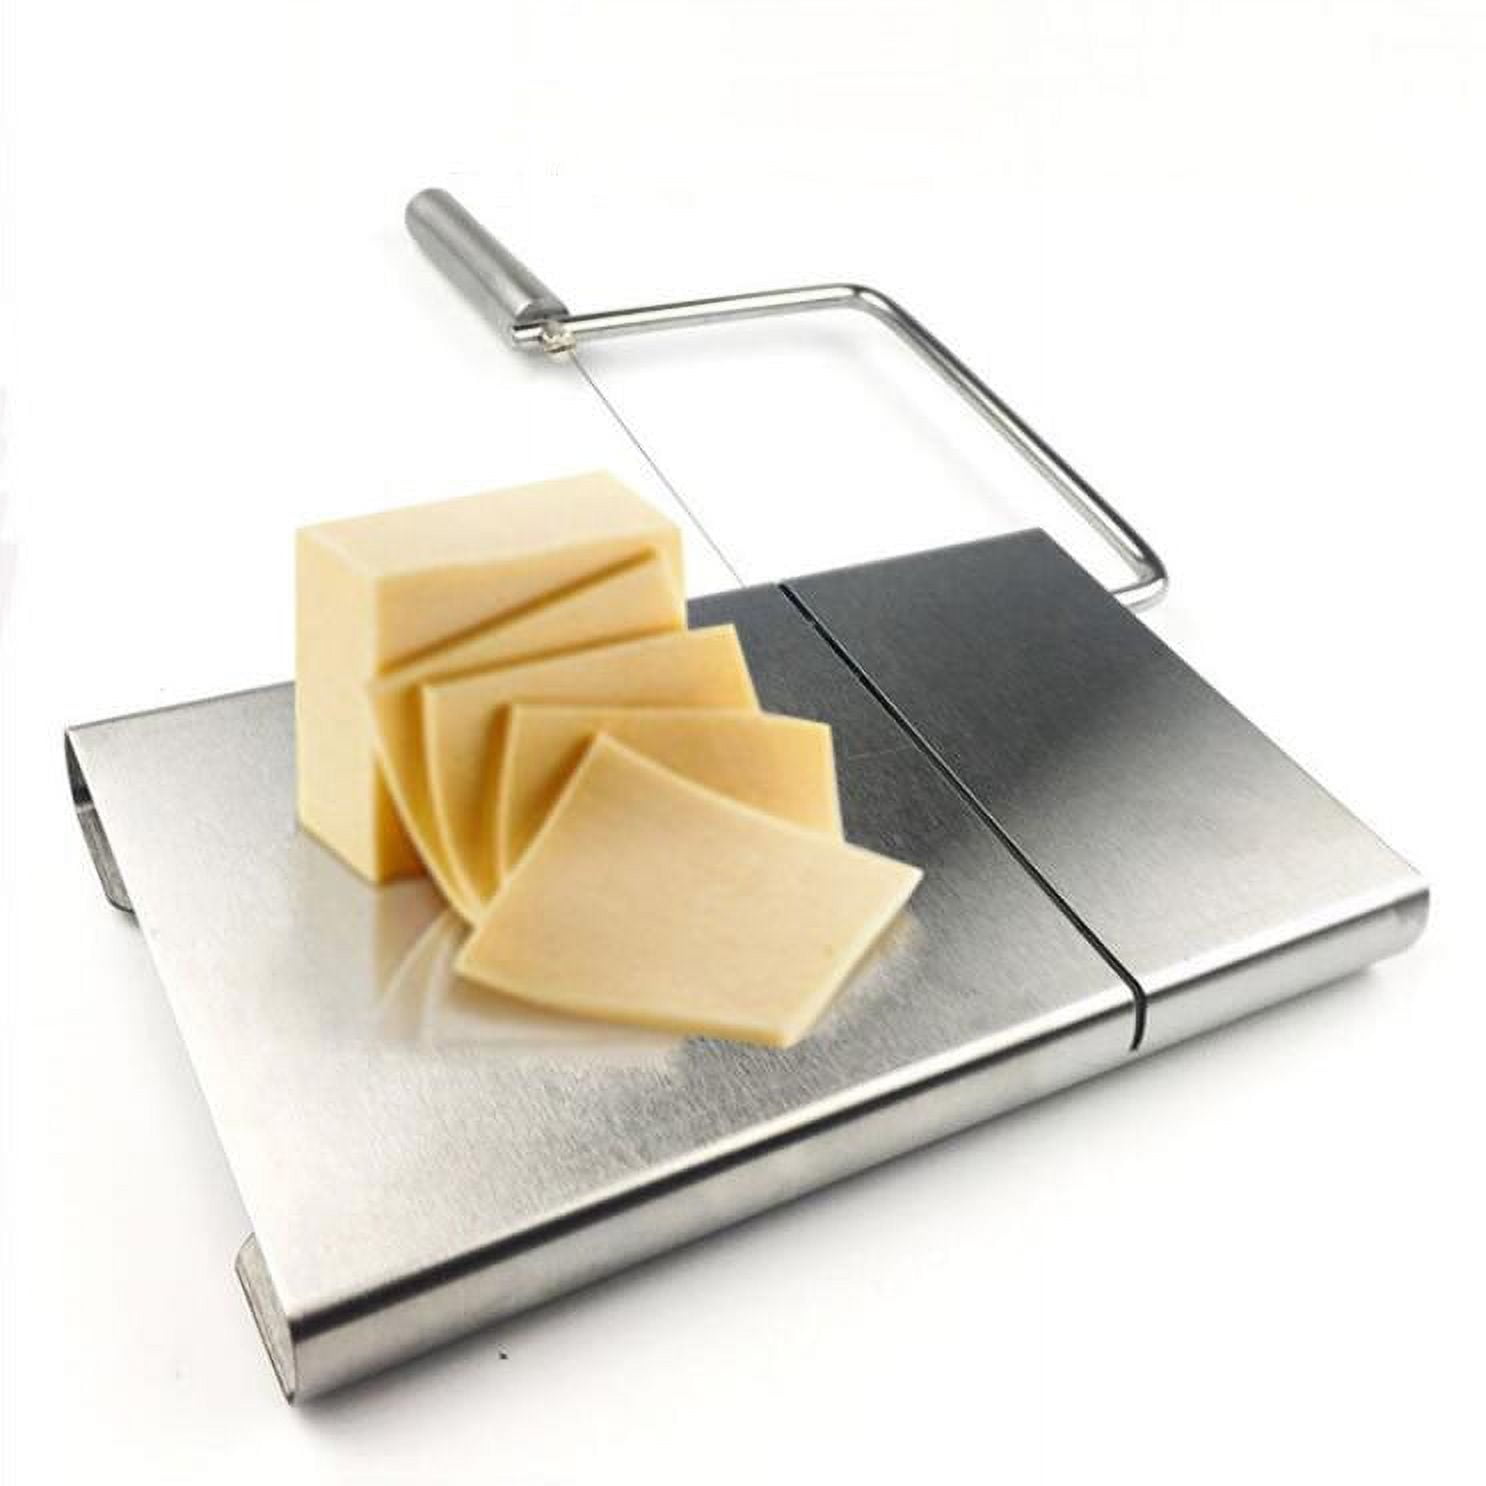 TOPCHANCES Cheese Slicer, Stainless Steel Cheese Cutter, Wire